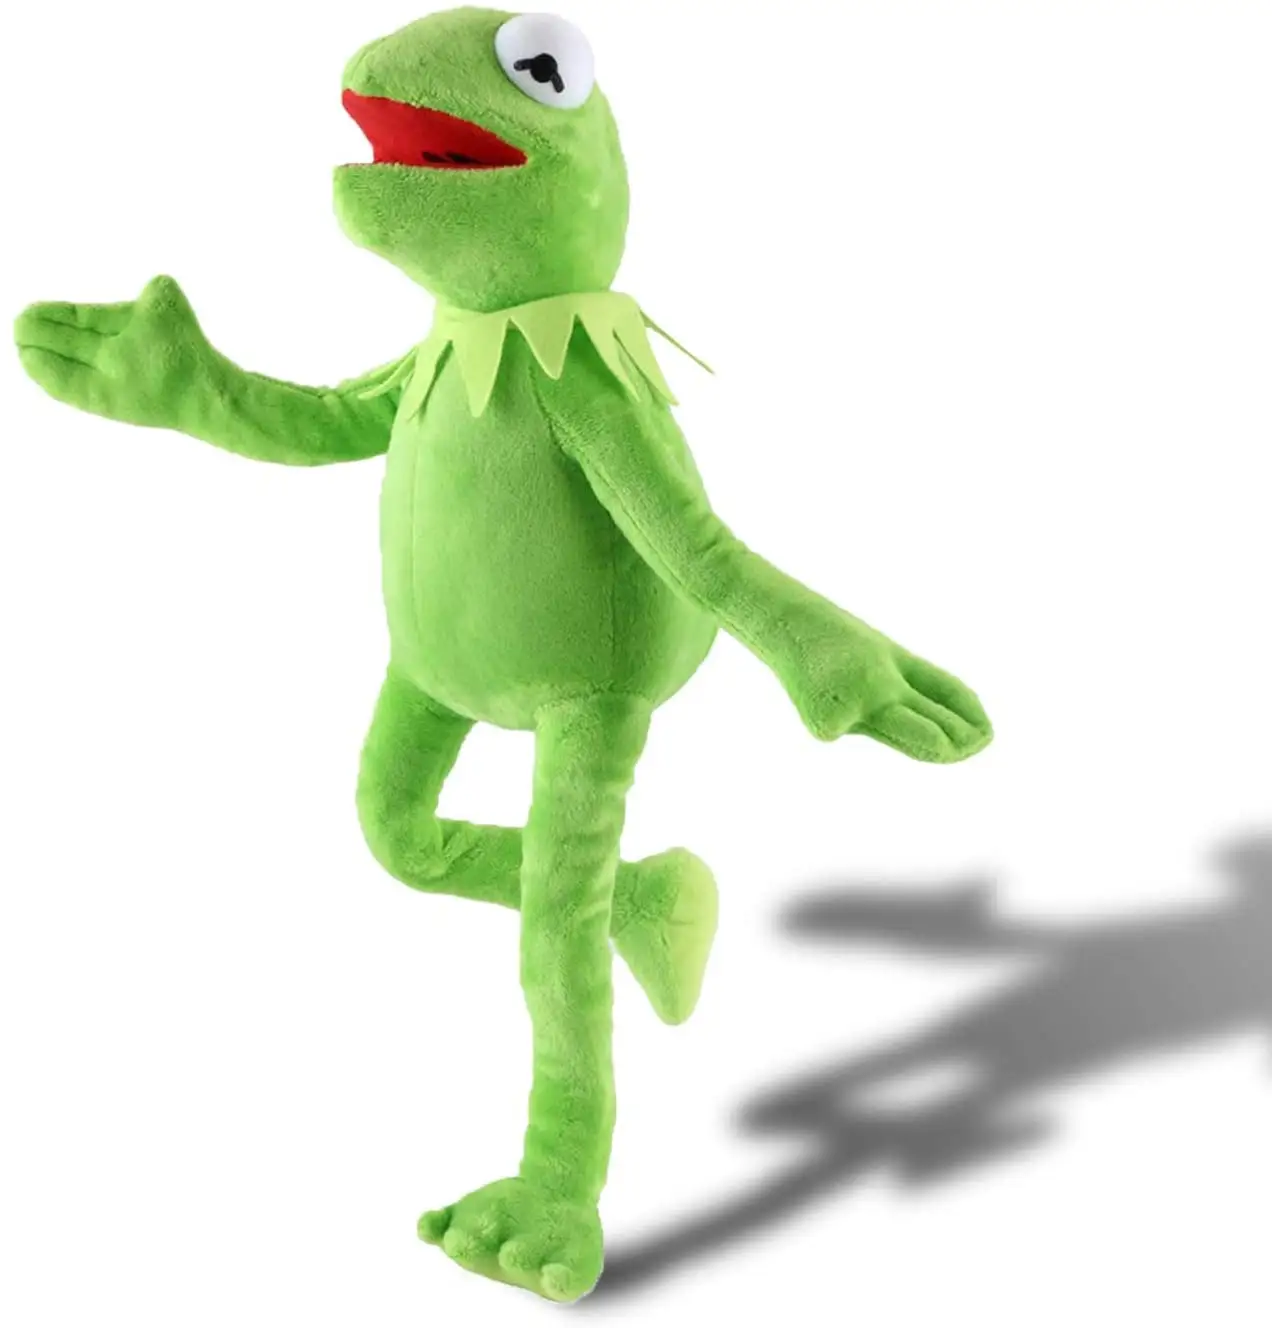 hot sale greenThe Muppets Show Soft and Funny Hand Frog Stuffed Plush Toy Vivid Puppet Good toy for kids